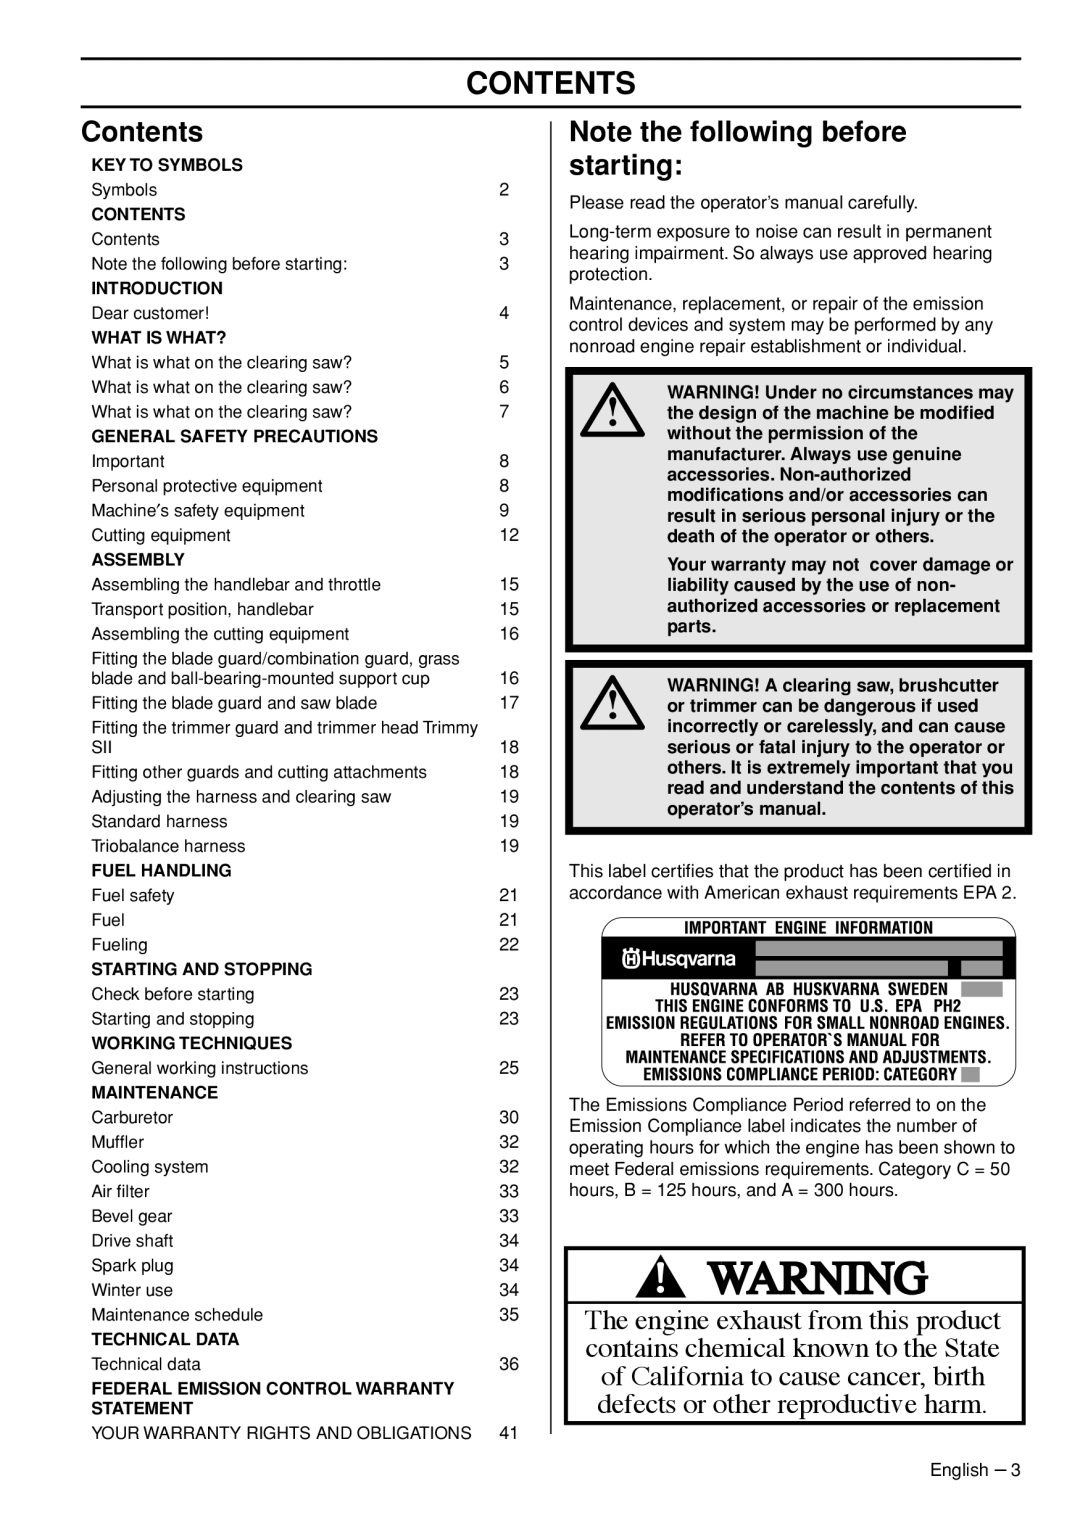 Husqvarna 335LX manual Contents, Note the following before starting, Key To Symbols, Introduction, What Is What?, Assembly 